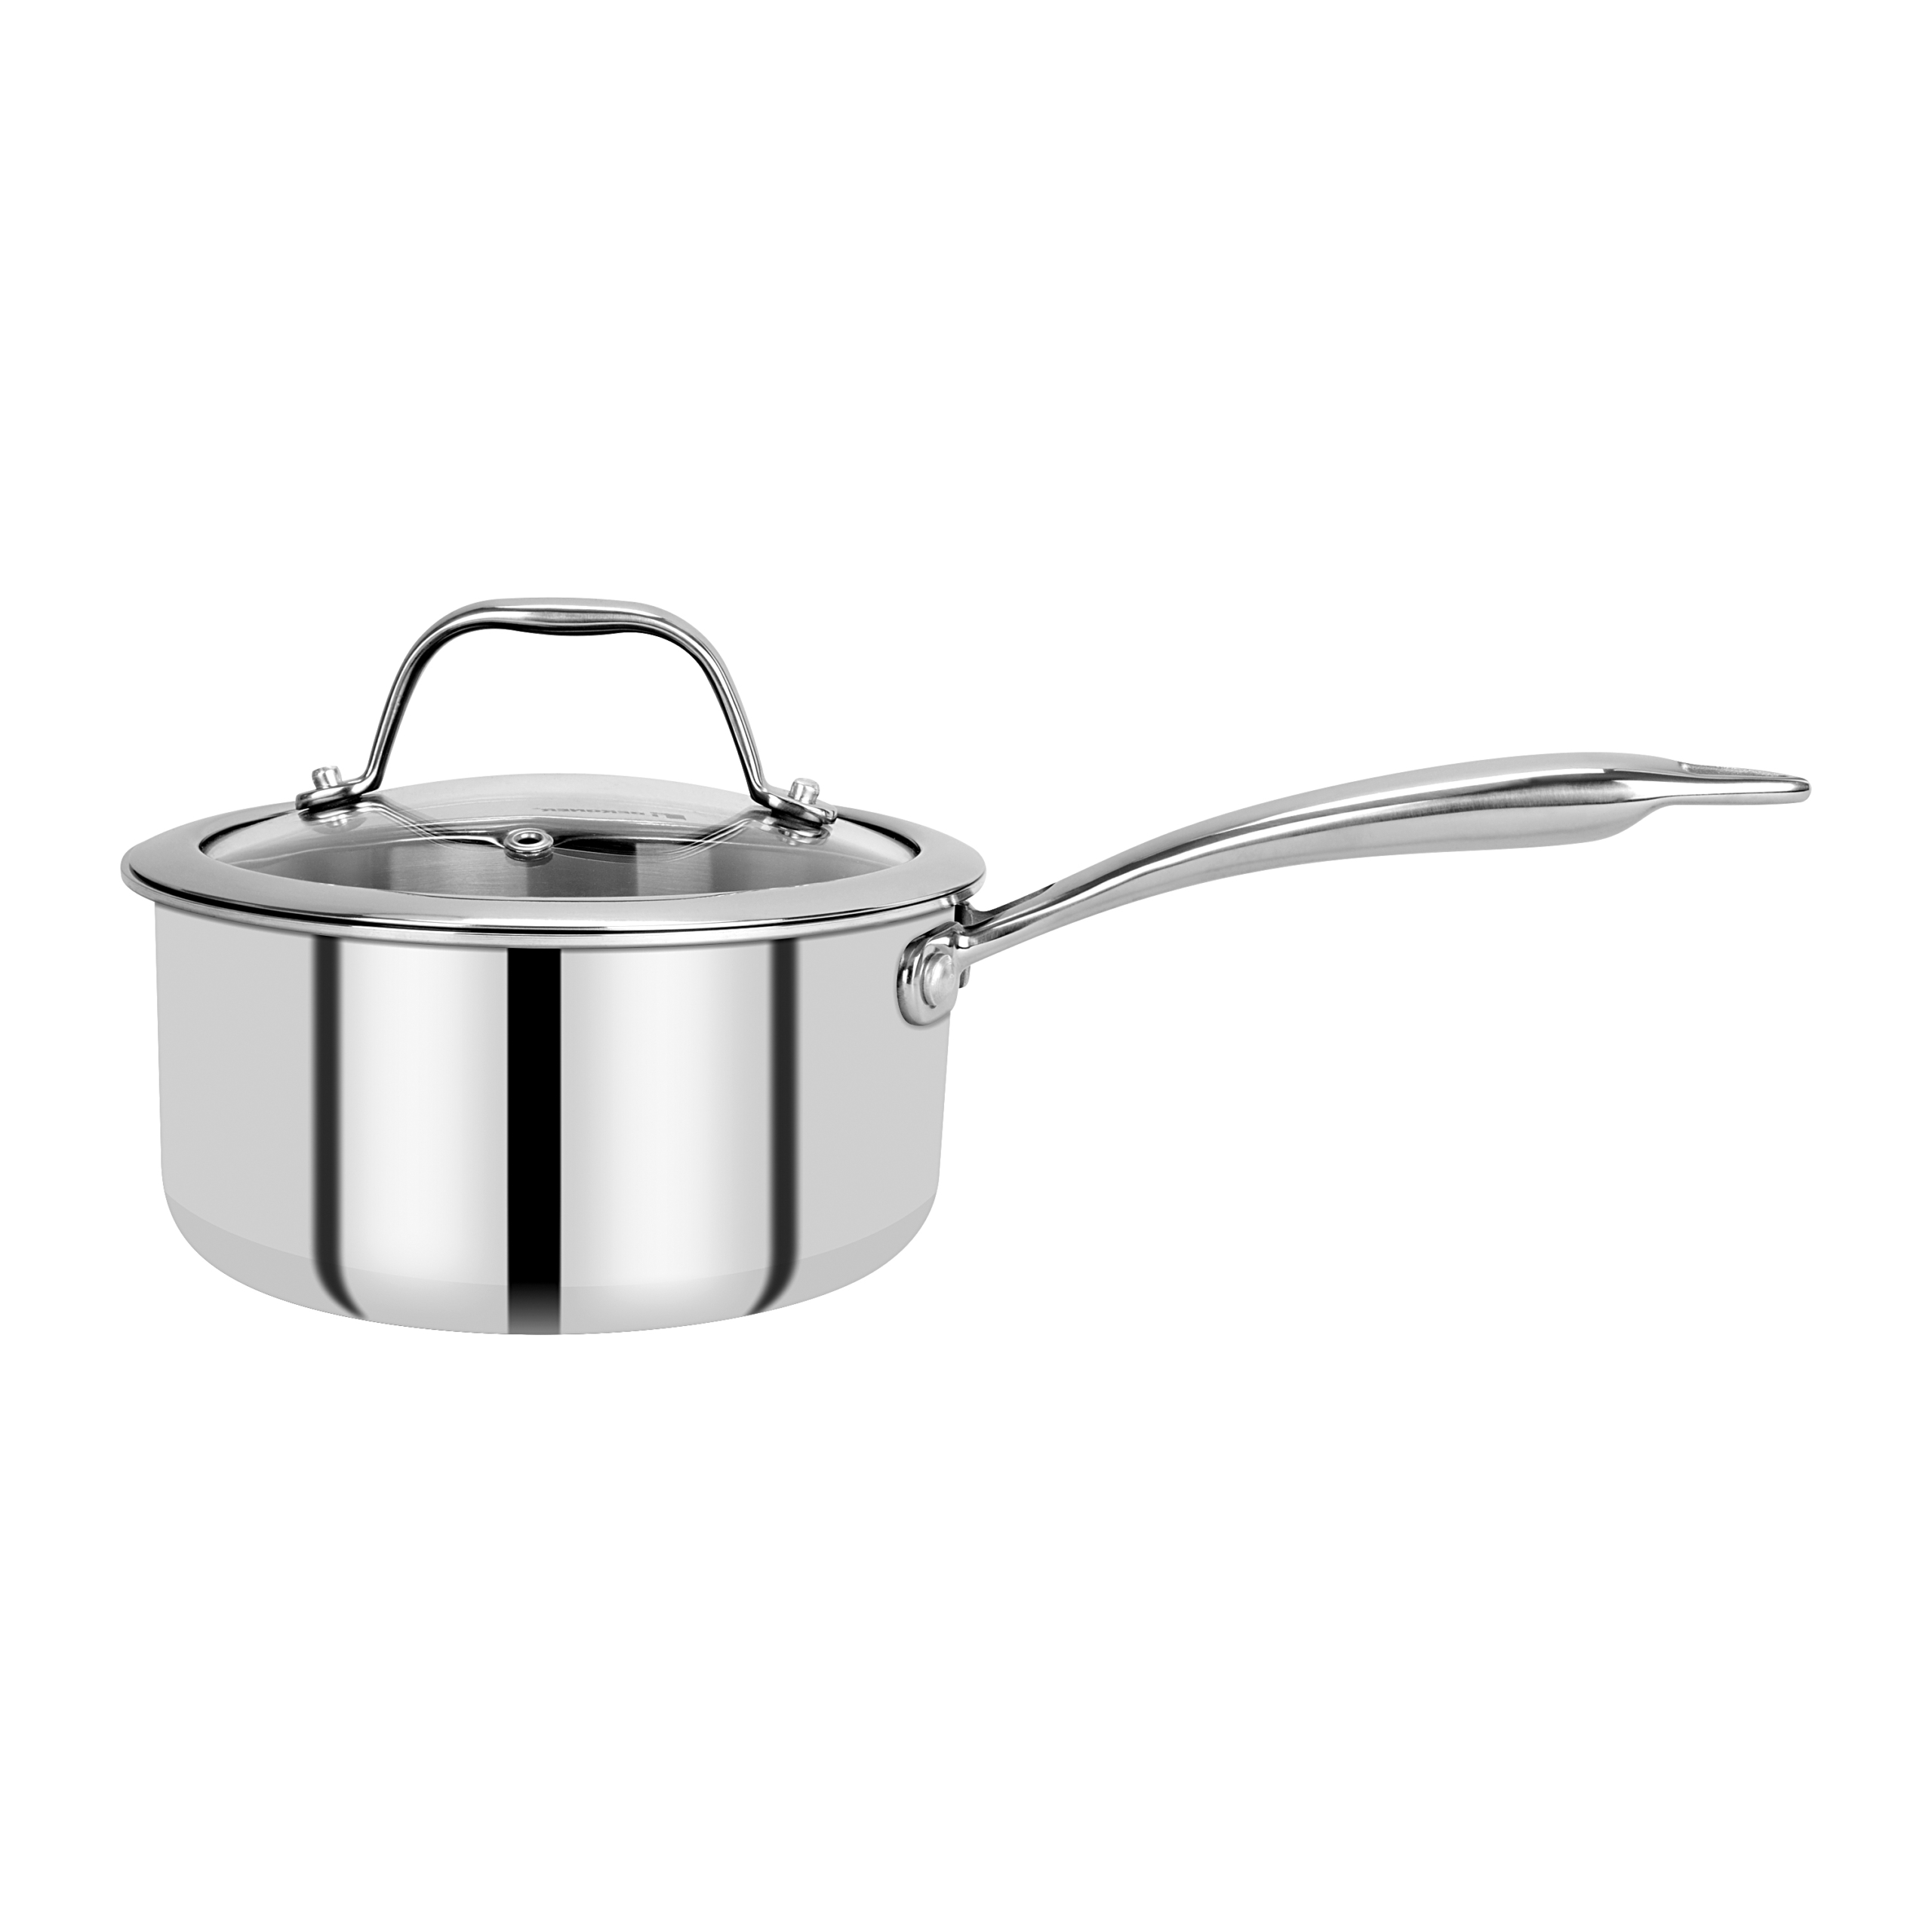 Bergner Hi-Tech Prism Saucepan with 14 cm size and 1 Ltr capacity